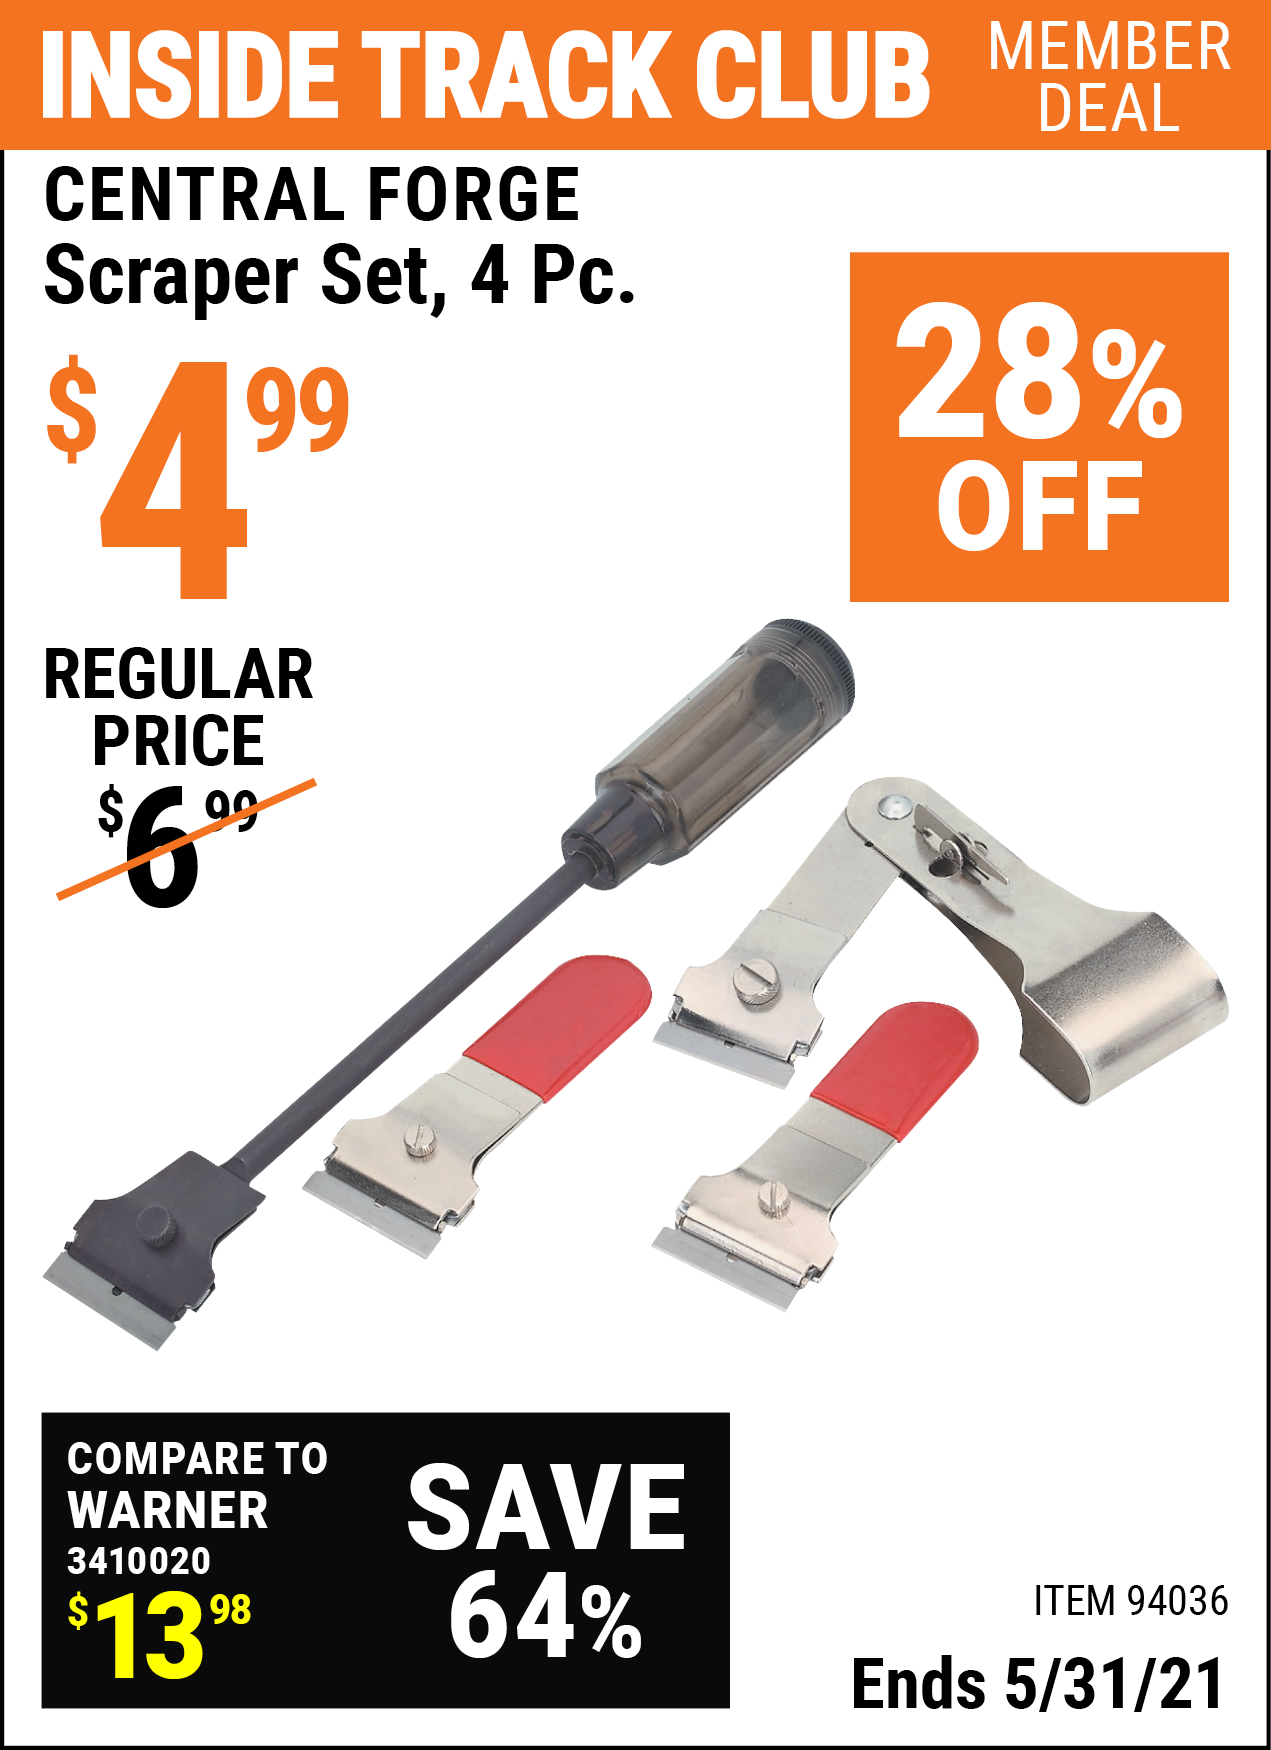 Inside Track Club members can buy the CENTRAL FORGE Scraper Set 4 Pc. (Item 94036) for $4.99, valid through 5/31/2021.